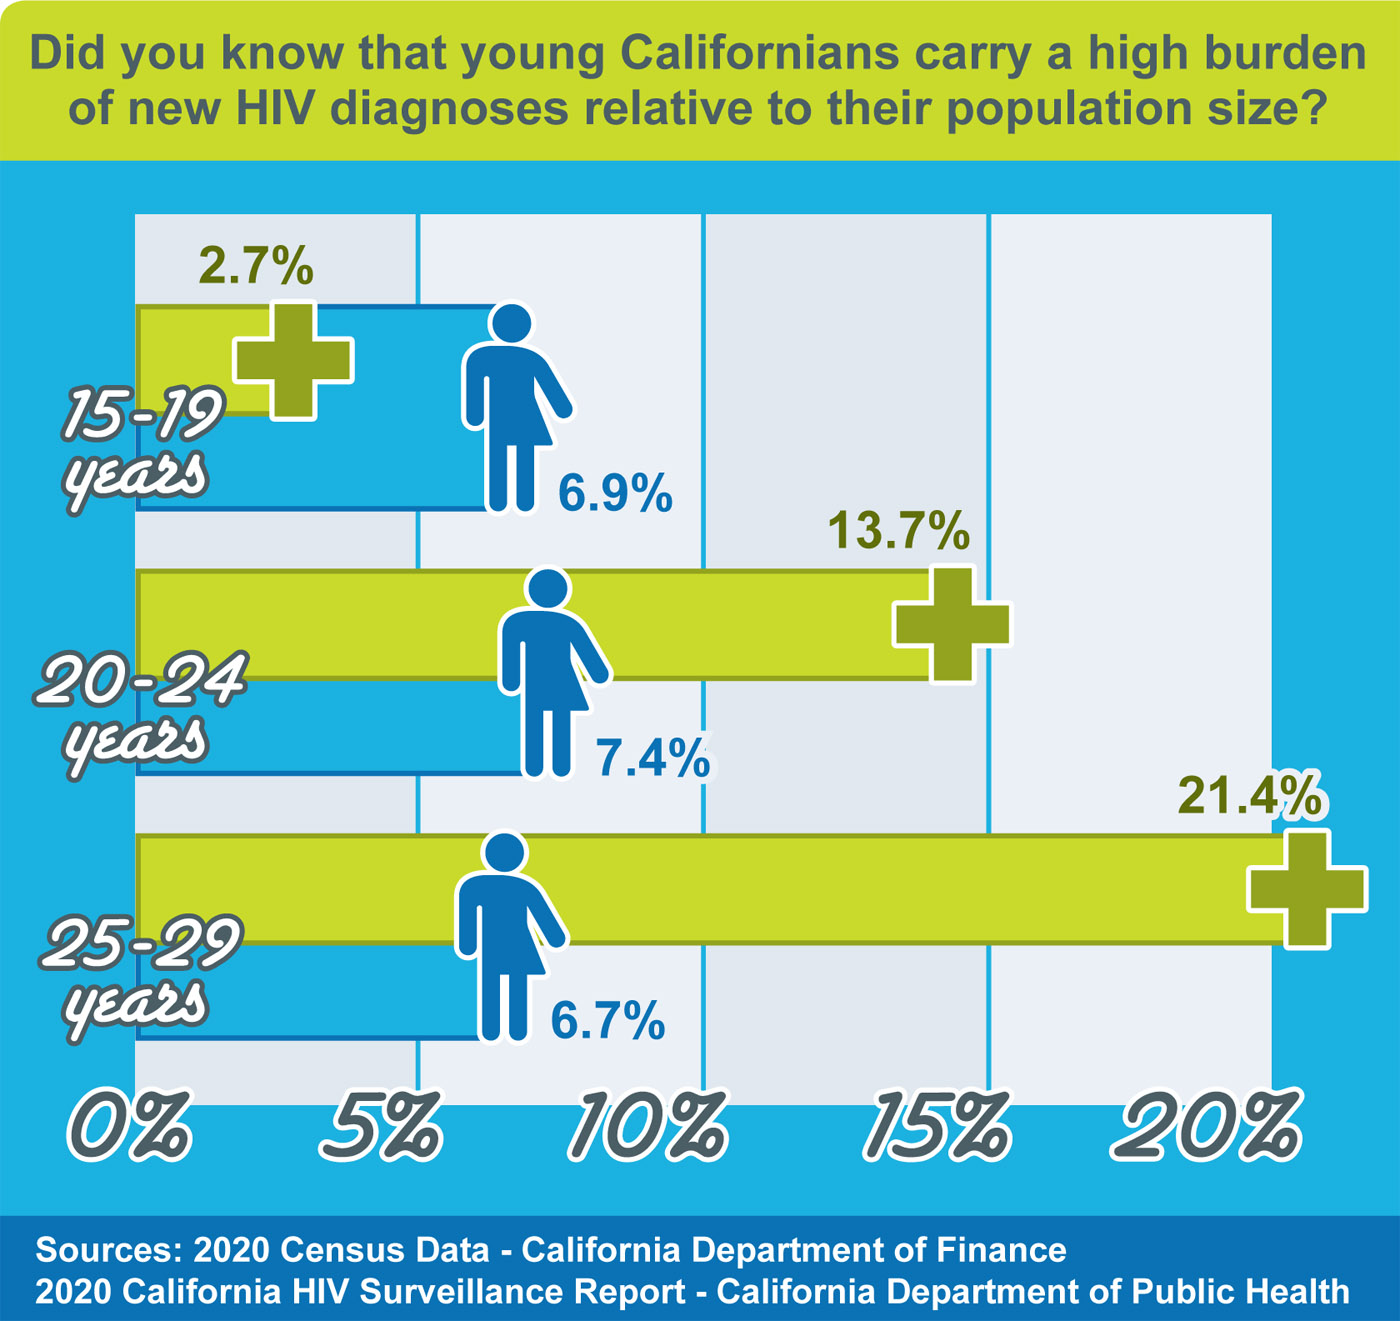 Bar graph showing young Californians carrying a high burden of new HIV diagnoses relative to their population size